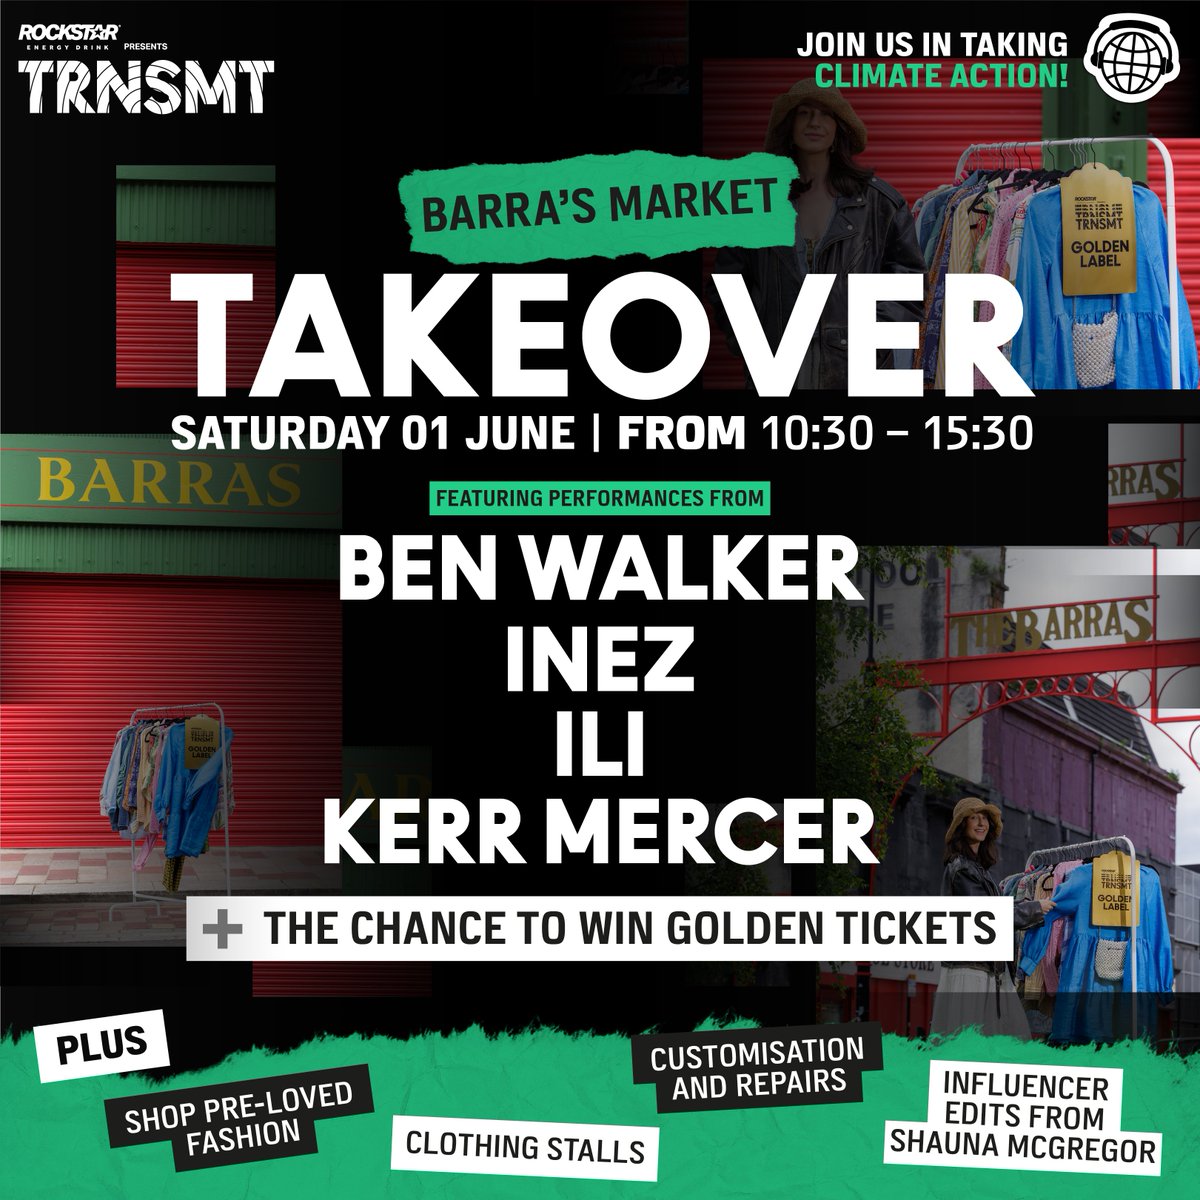 Join us this Saturday as we take over the iconic Barra’s Market to celebrate all things fashion, sustainability, innovation and community - with the chance to WIN some golden tickets ⚡️ @rockstarenergyuki